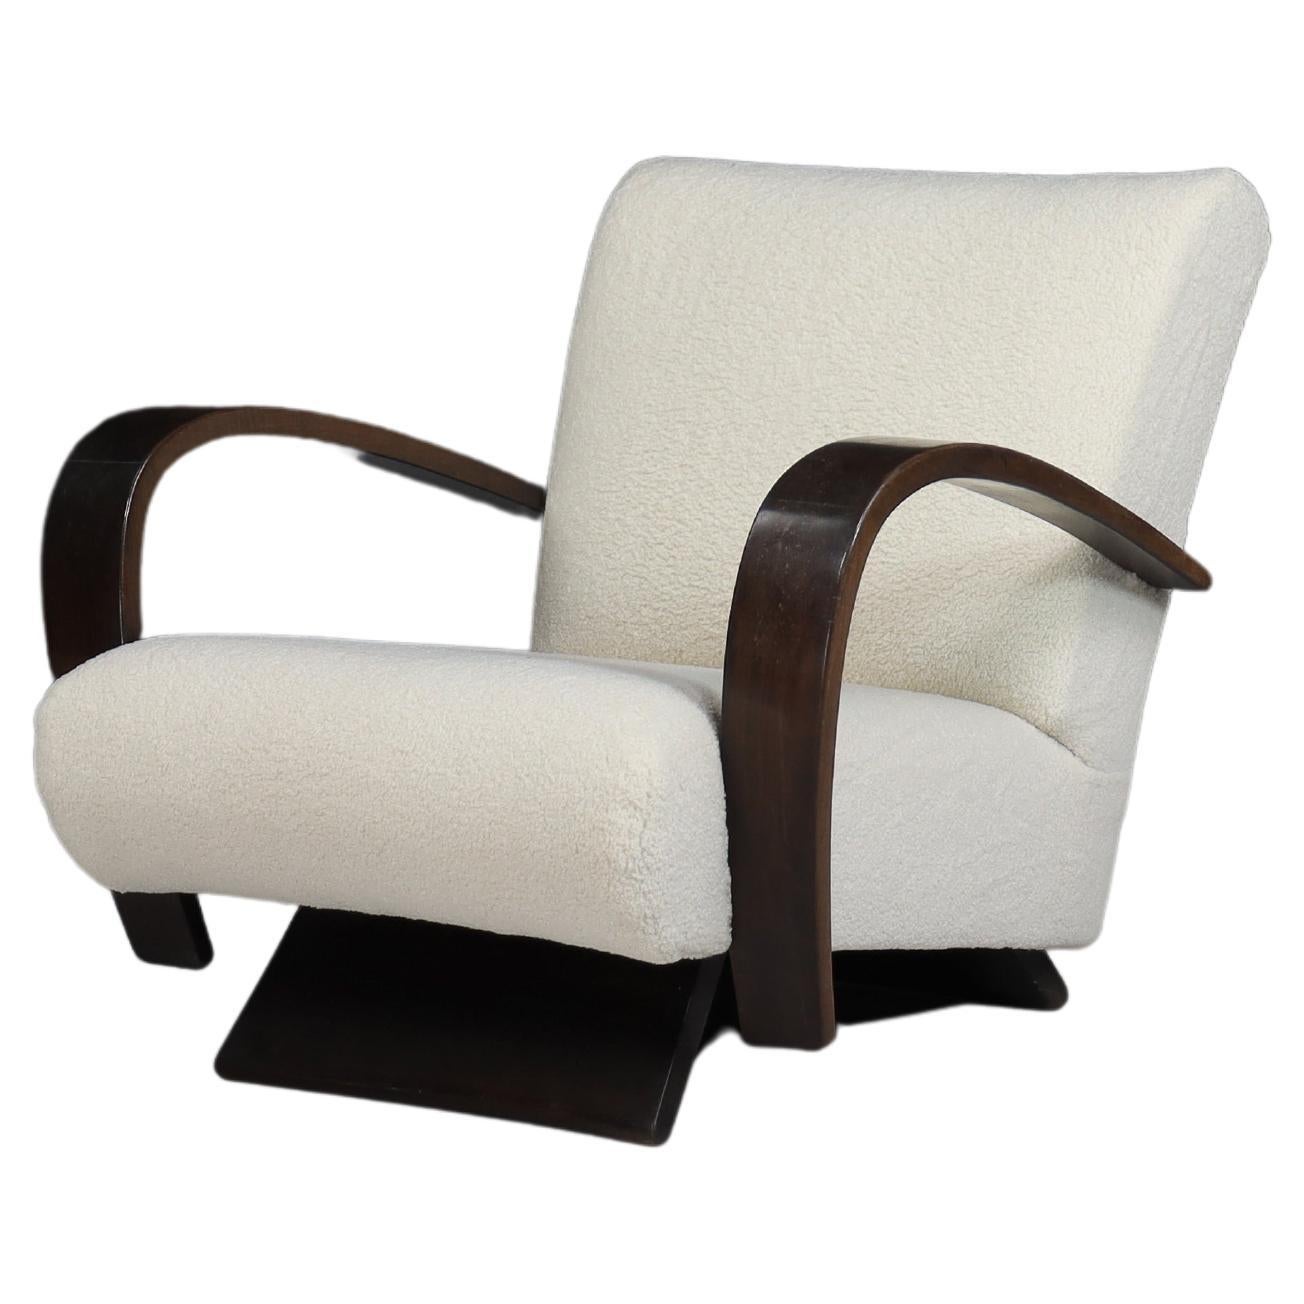 Art Deco Armchairs in Walnut and Teddy Upholstery, Italy, 1930s  For Sale